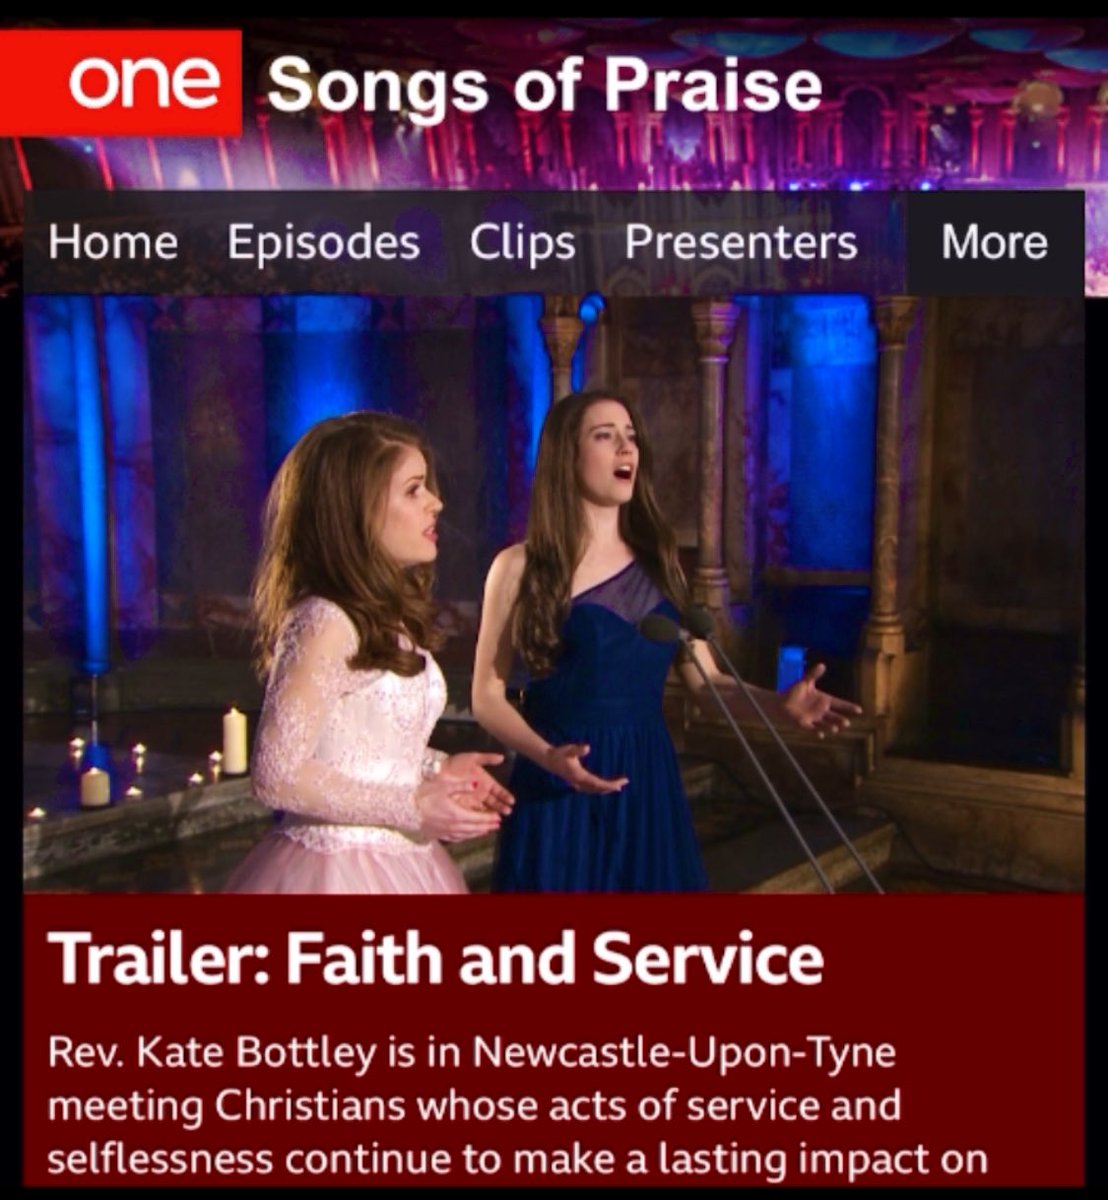 Exciting!
Tune in to the fabulous @BBCSoP #songsofpraise to hear @maryjessmusic and me sing a very special version of Ave Maria.
On BBC and then @BBCiPlayer